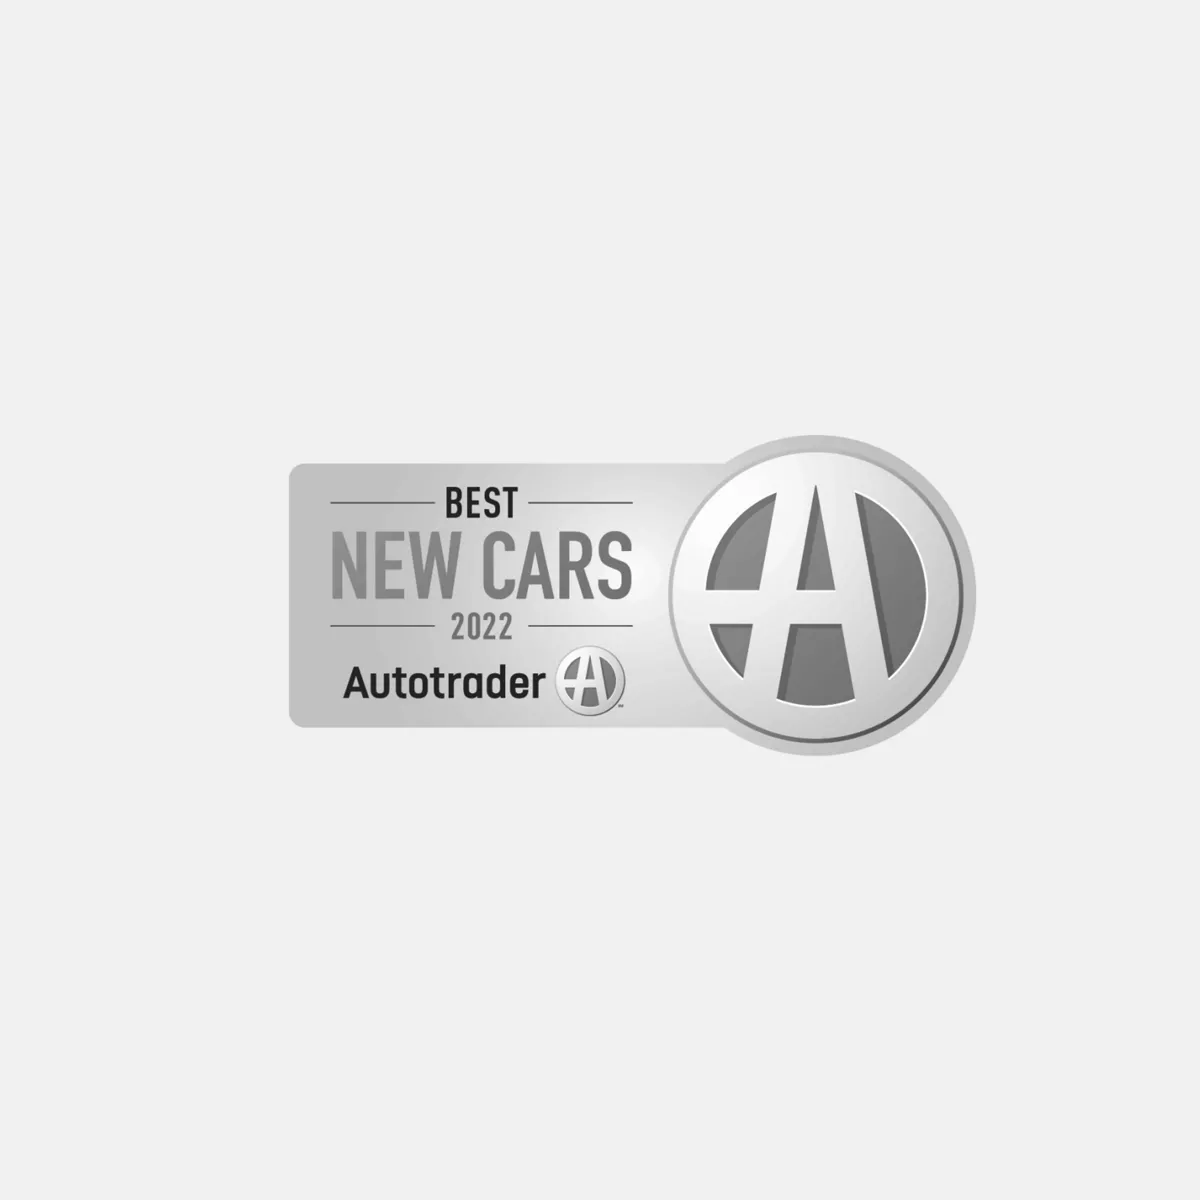 Best new cars 2022 Autotrader.